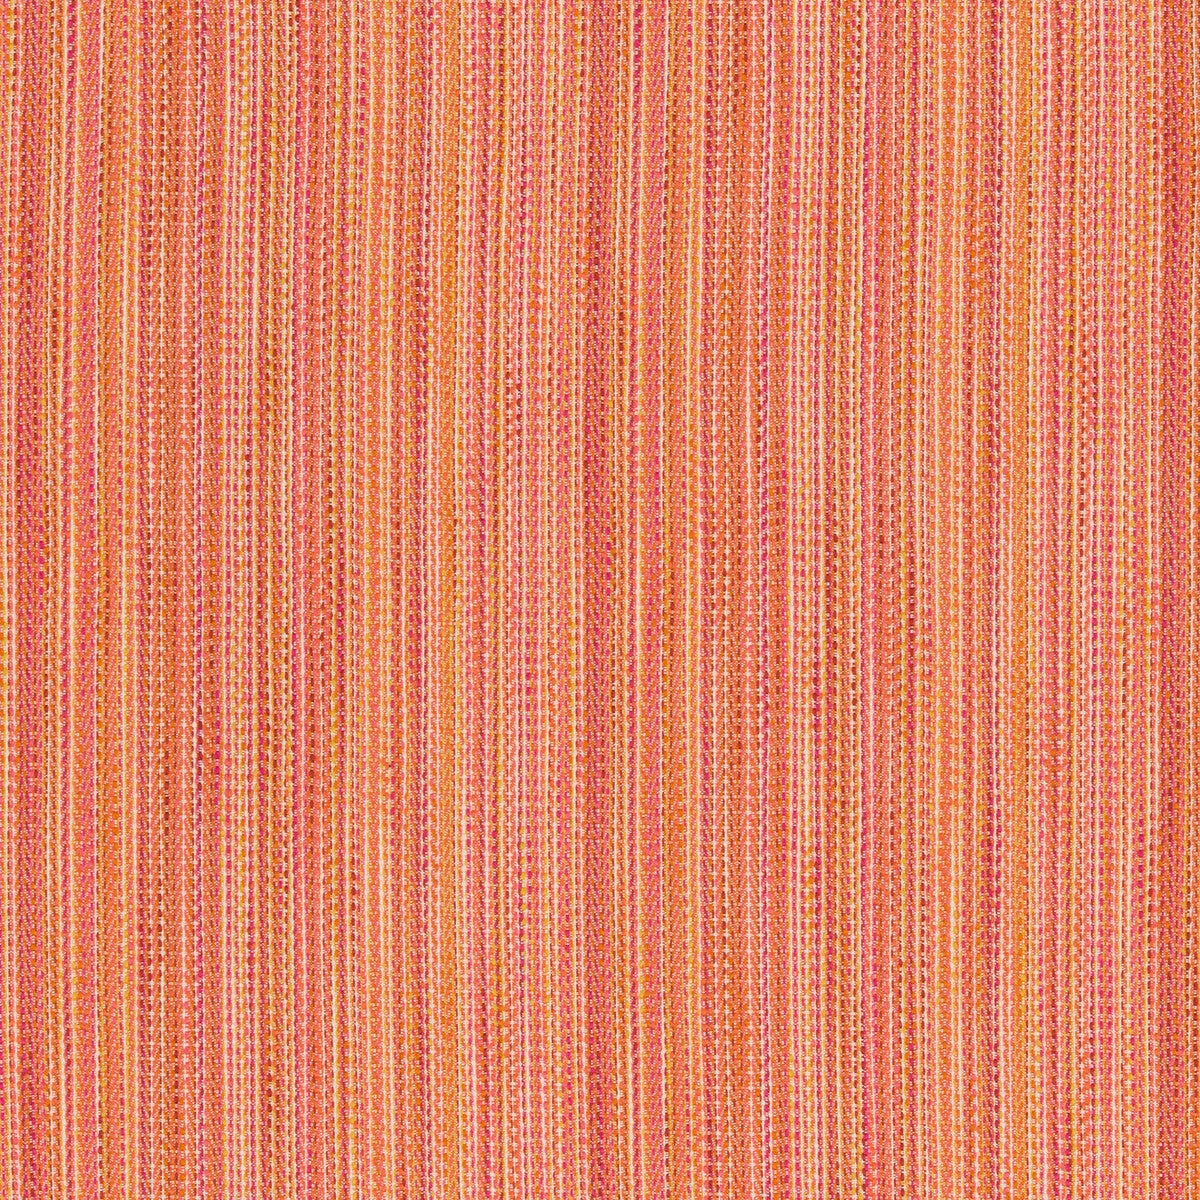 Kravet Design fabric in 36077-719 color - pattern 36077.719.0 - by Kravet Design in the Inside Out Performance Fabrics collection